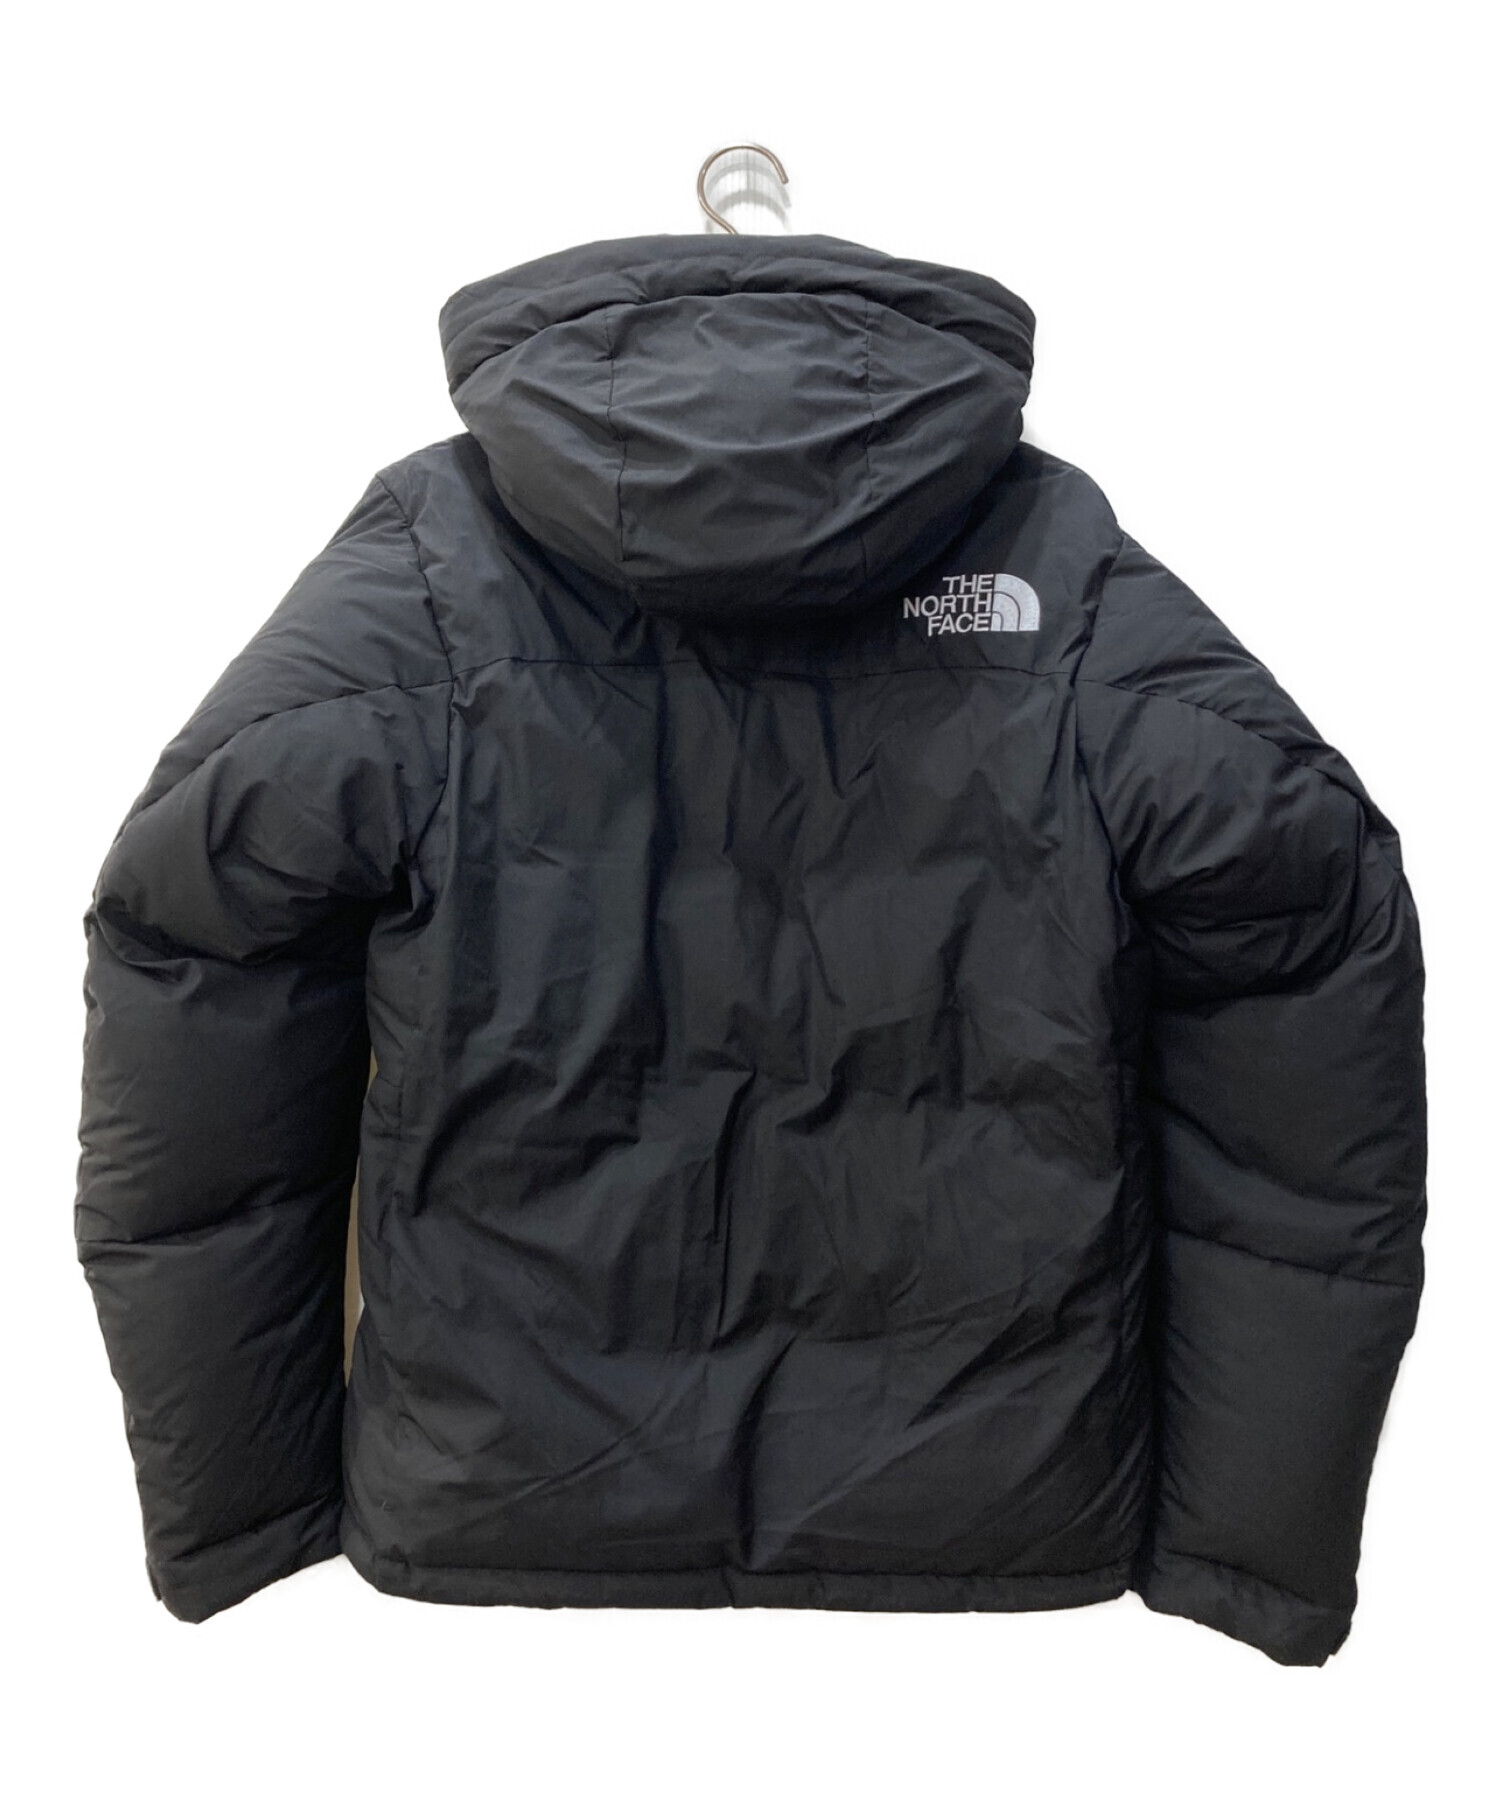 THE NORTH FACE バルトロライトジャケットsizeS 黒